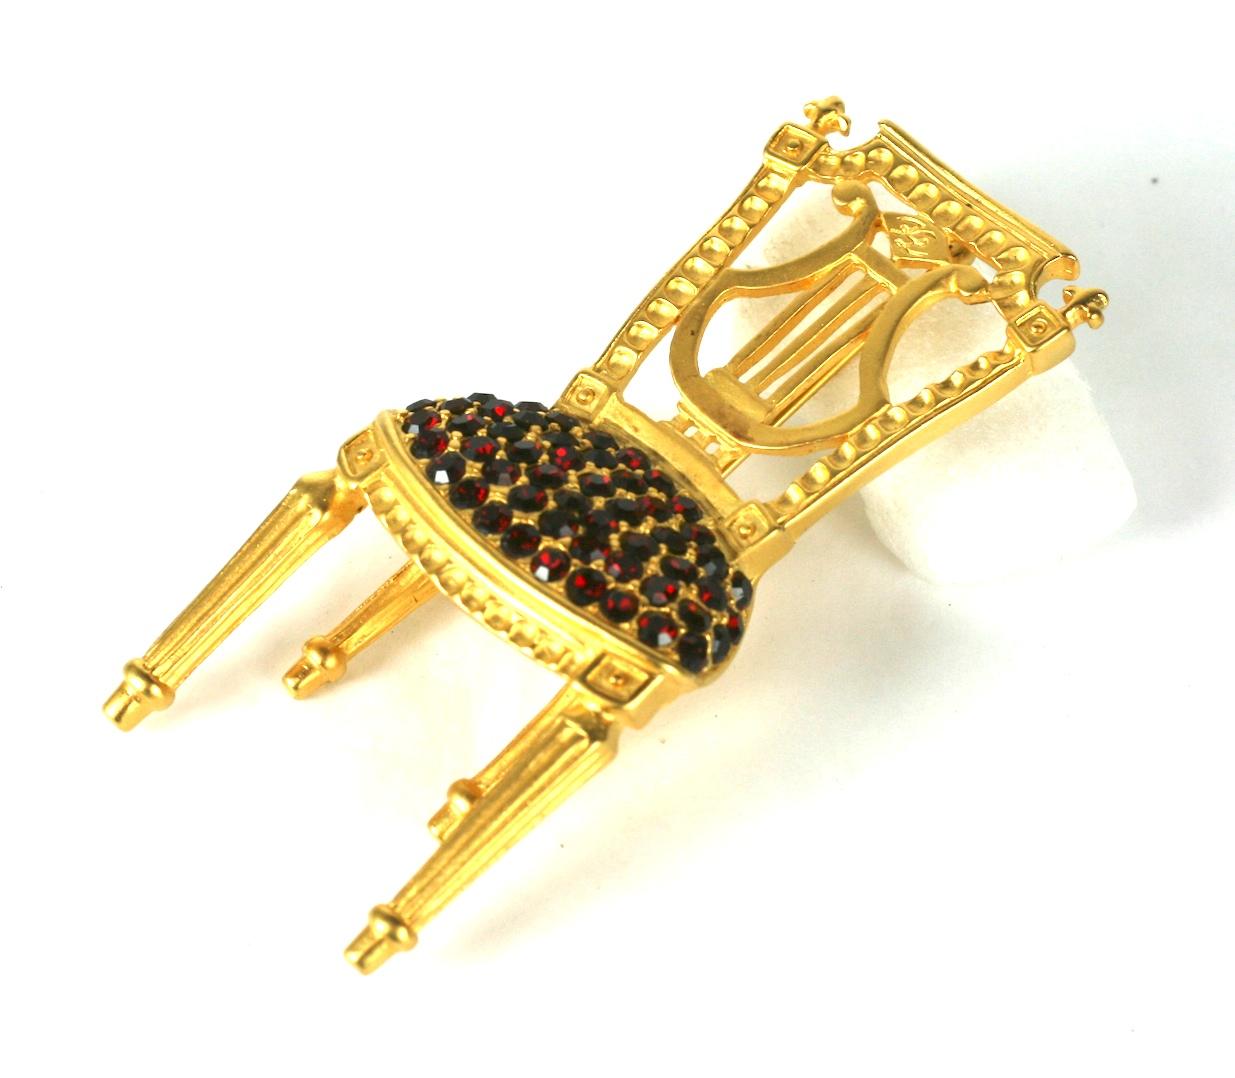 Iconic and charming Karl Lagerfeld French Chair Brooch from his 